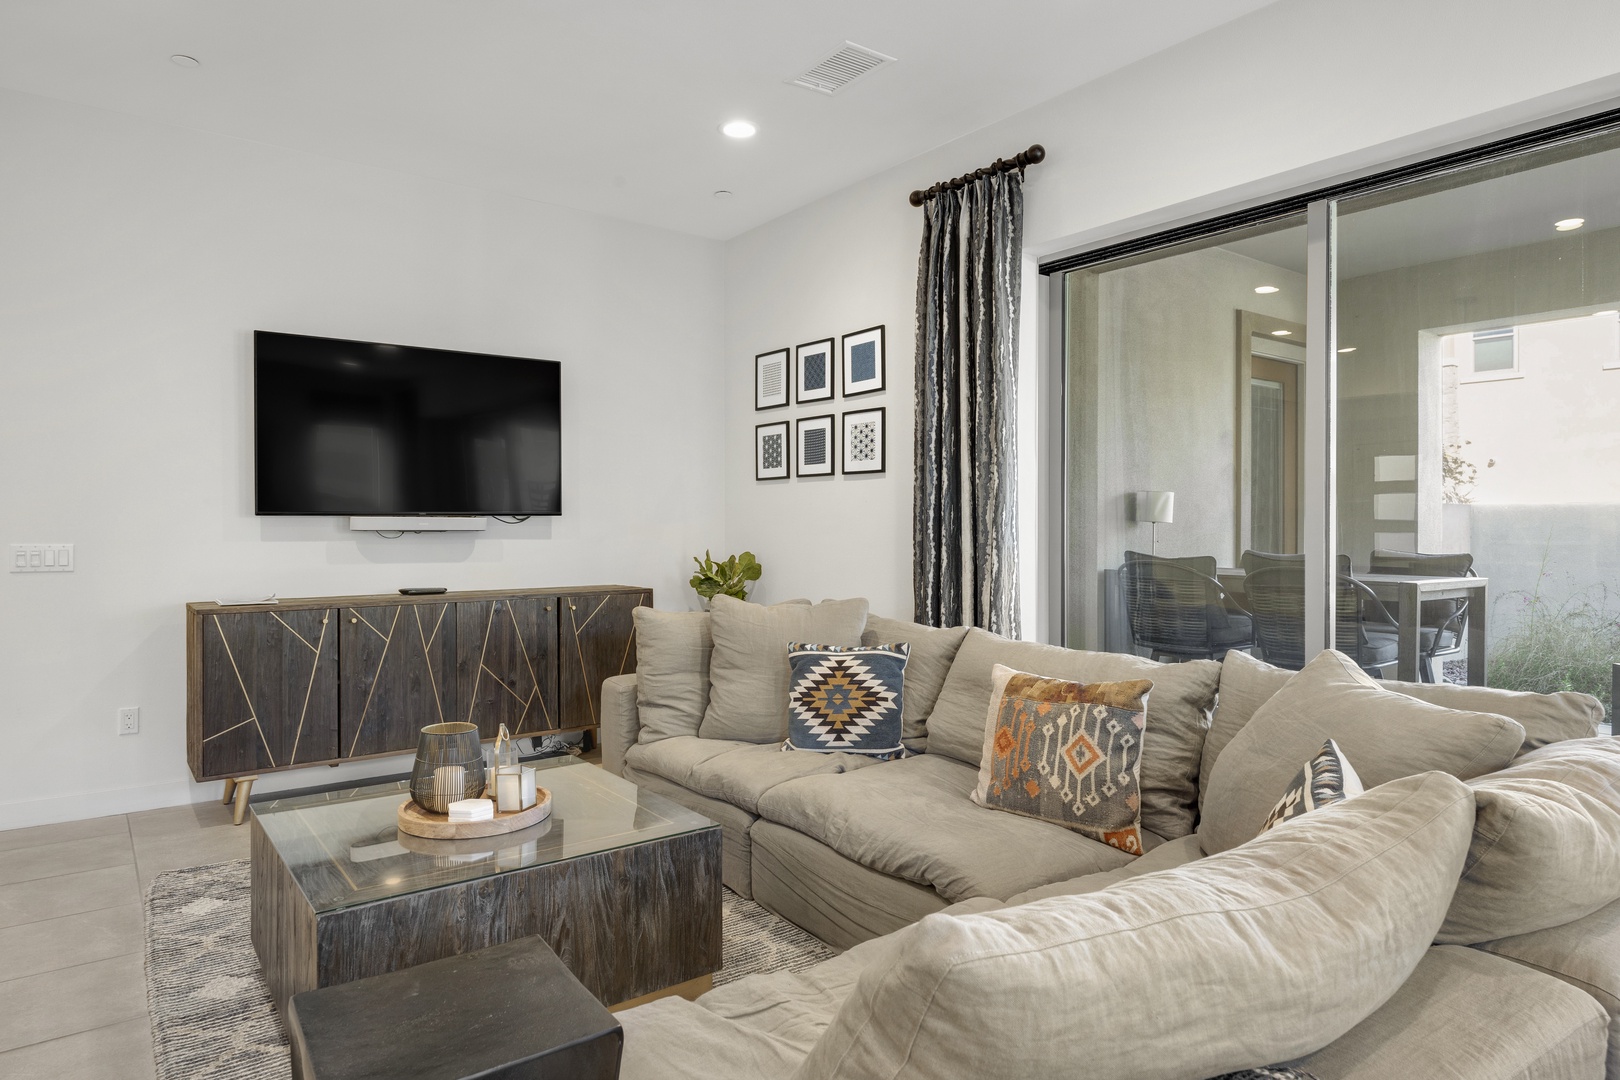 Spacious living space with ample seating, and Smart TV